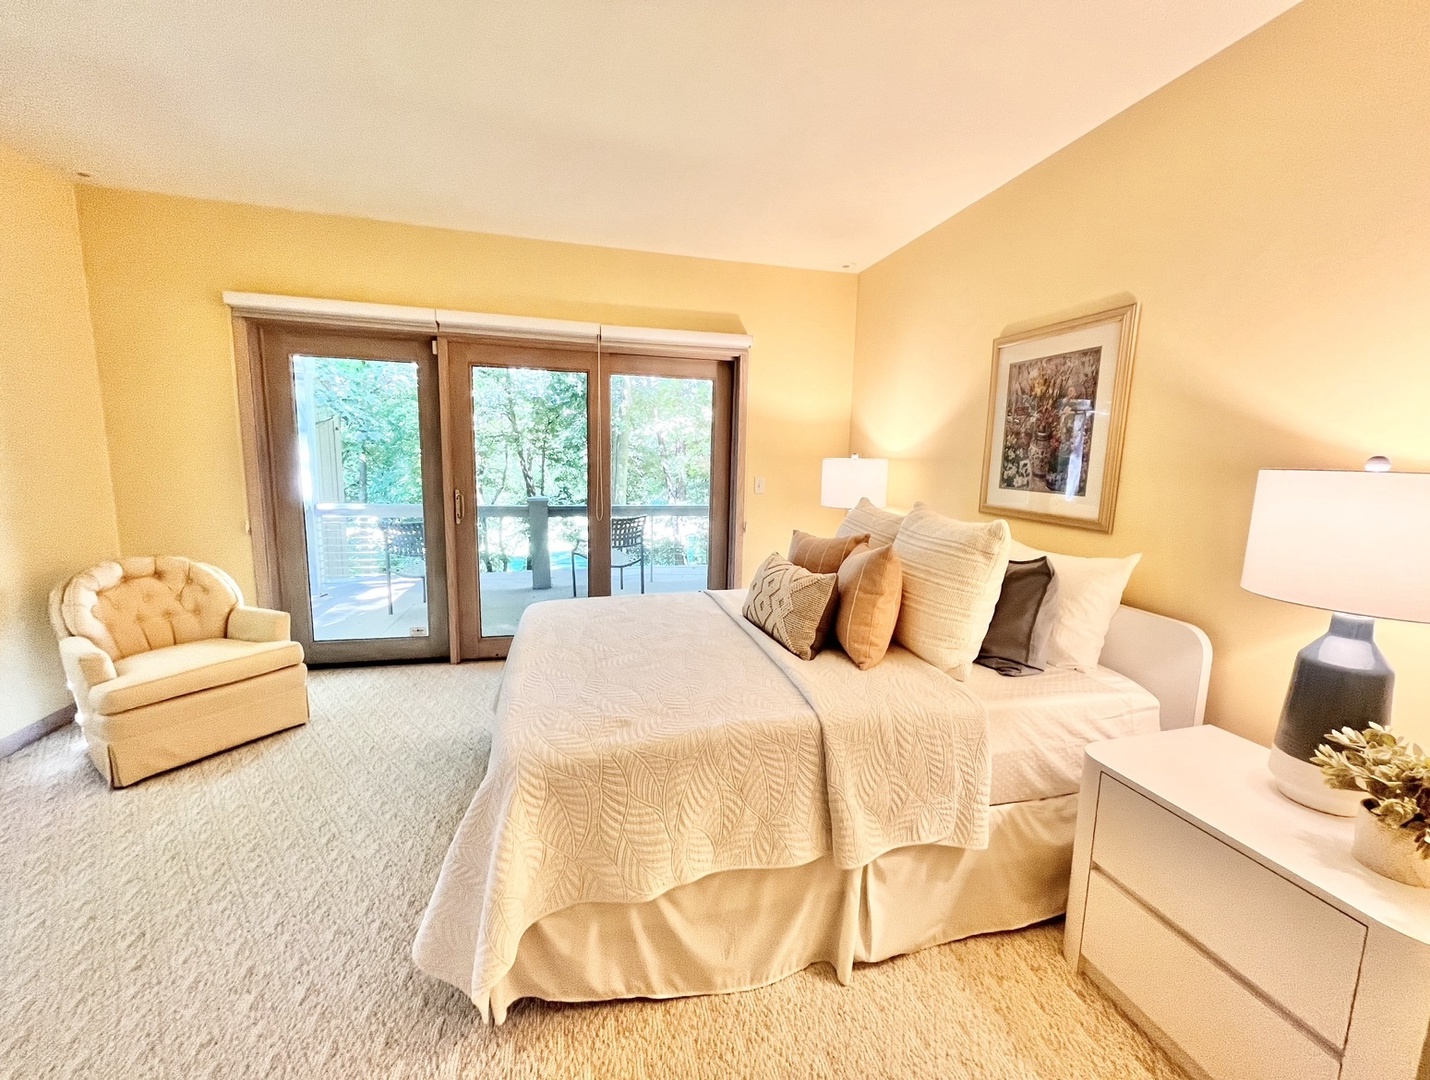 The 3rd of 3 walk-out lower-level queen bedrooms, with access to the Jack & Jill bath